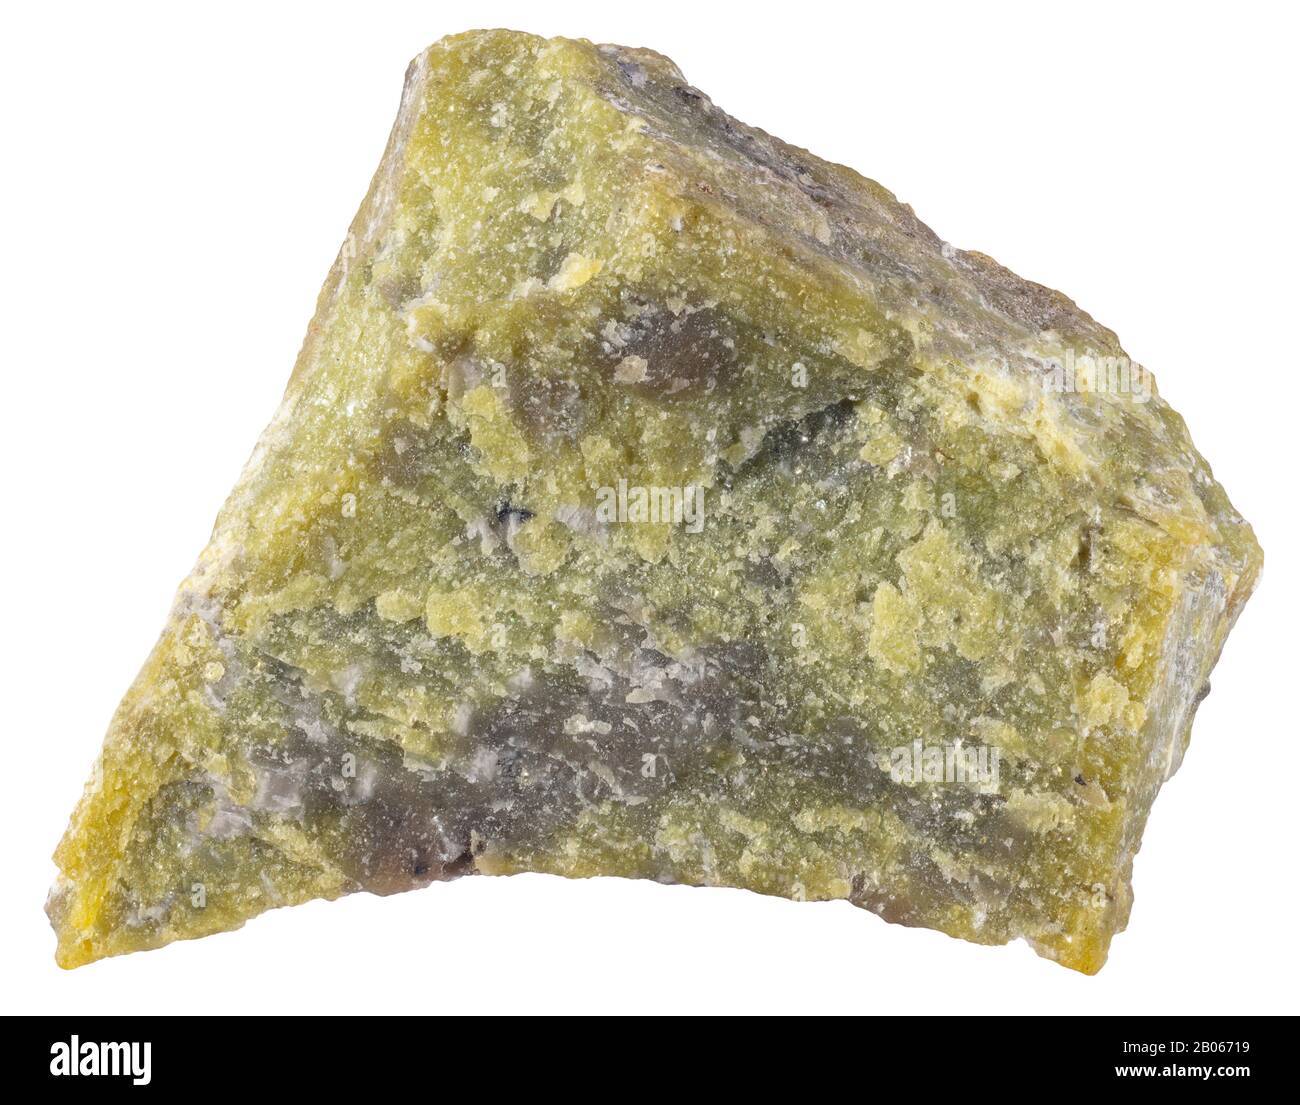 Dunite, Plutonic, Estrei, Quebec Dunite is an ultramafic plutonic rock that is composed almost exclusively of olivine. Stock Photo